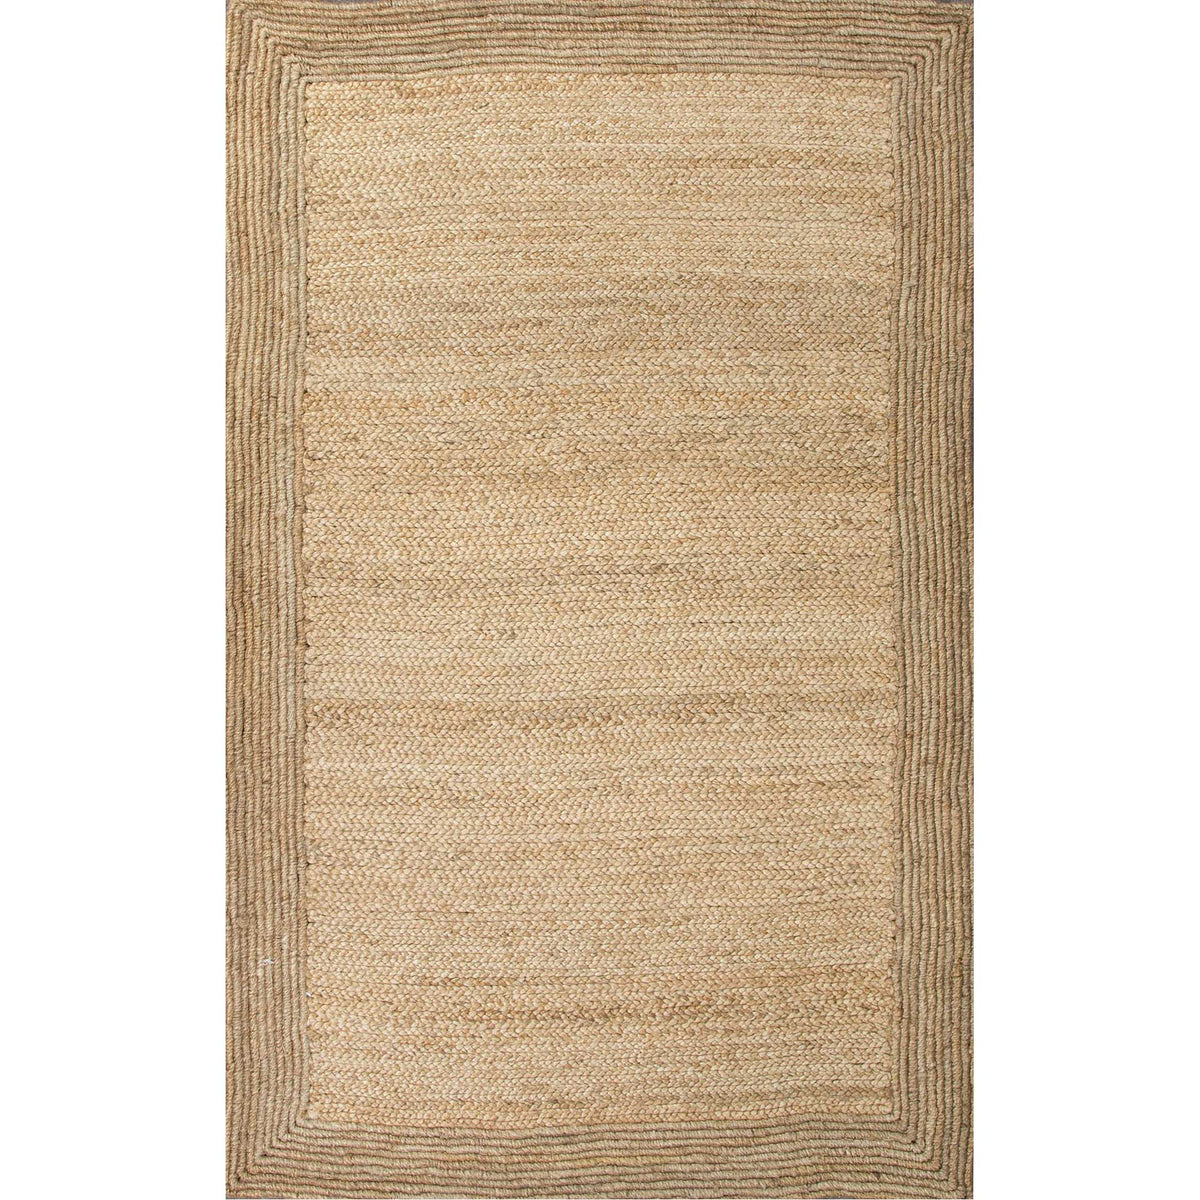 Naturals Aboo Natural Silver Area Rug